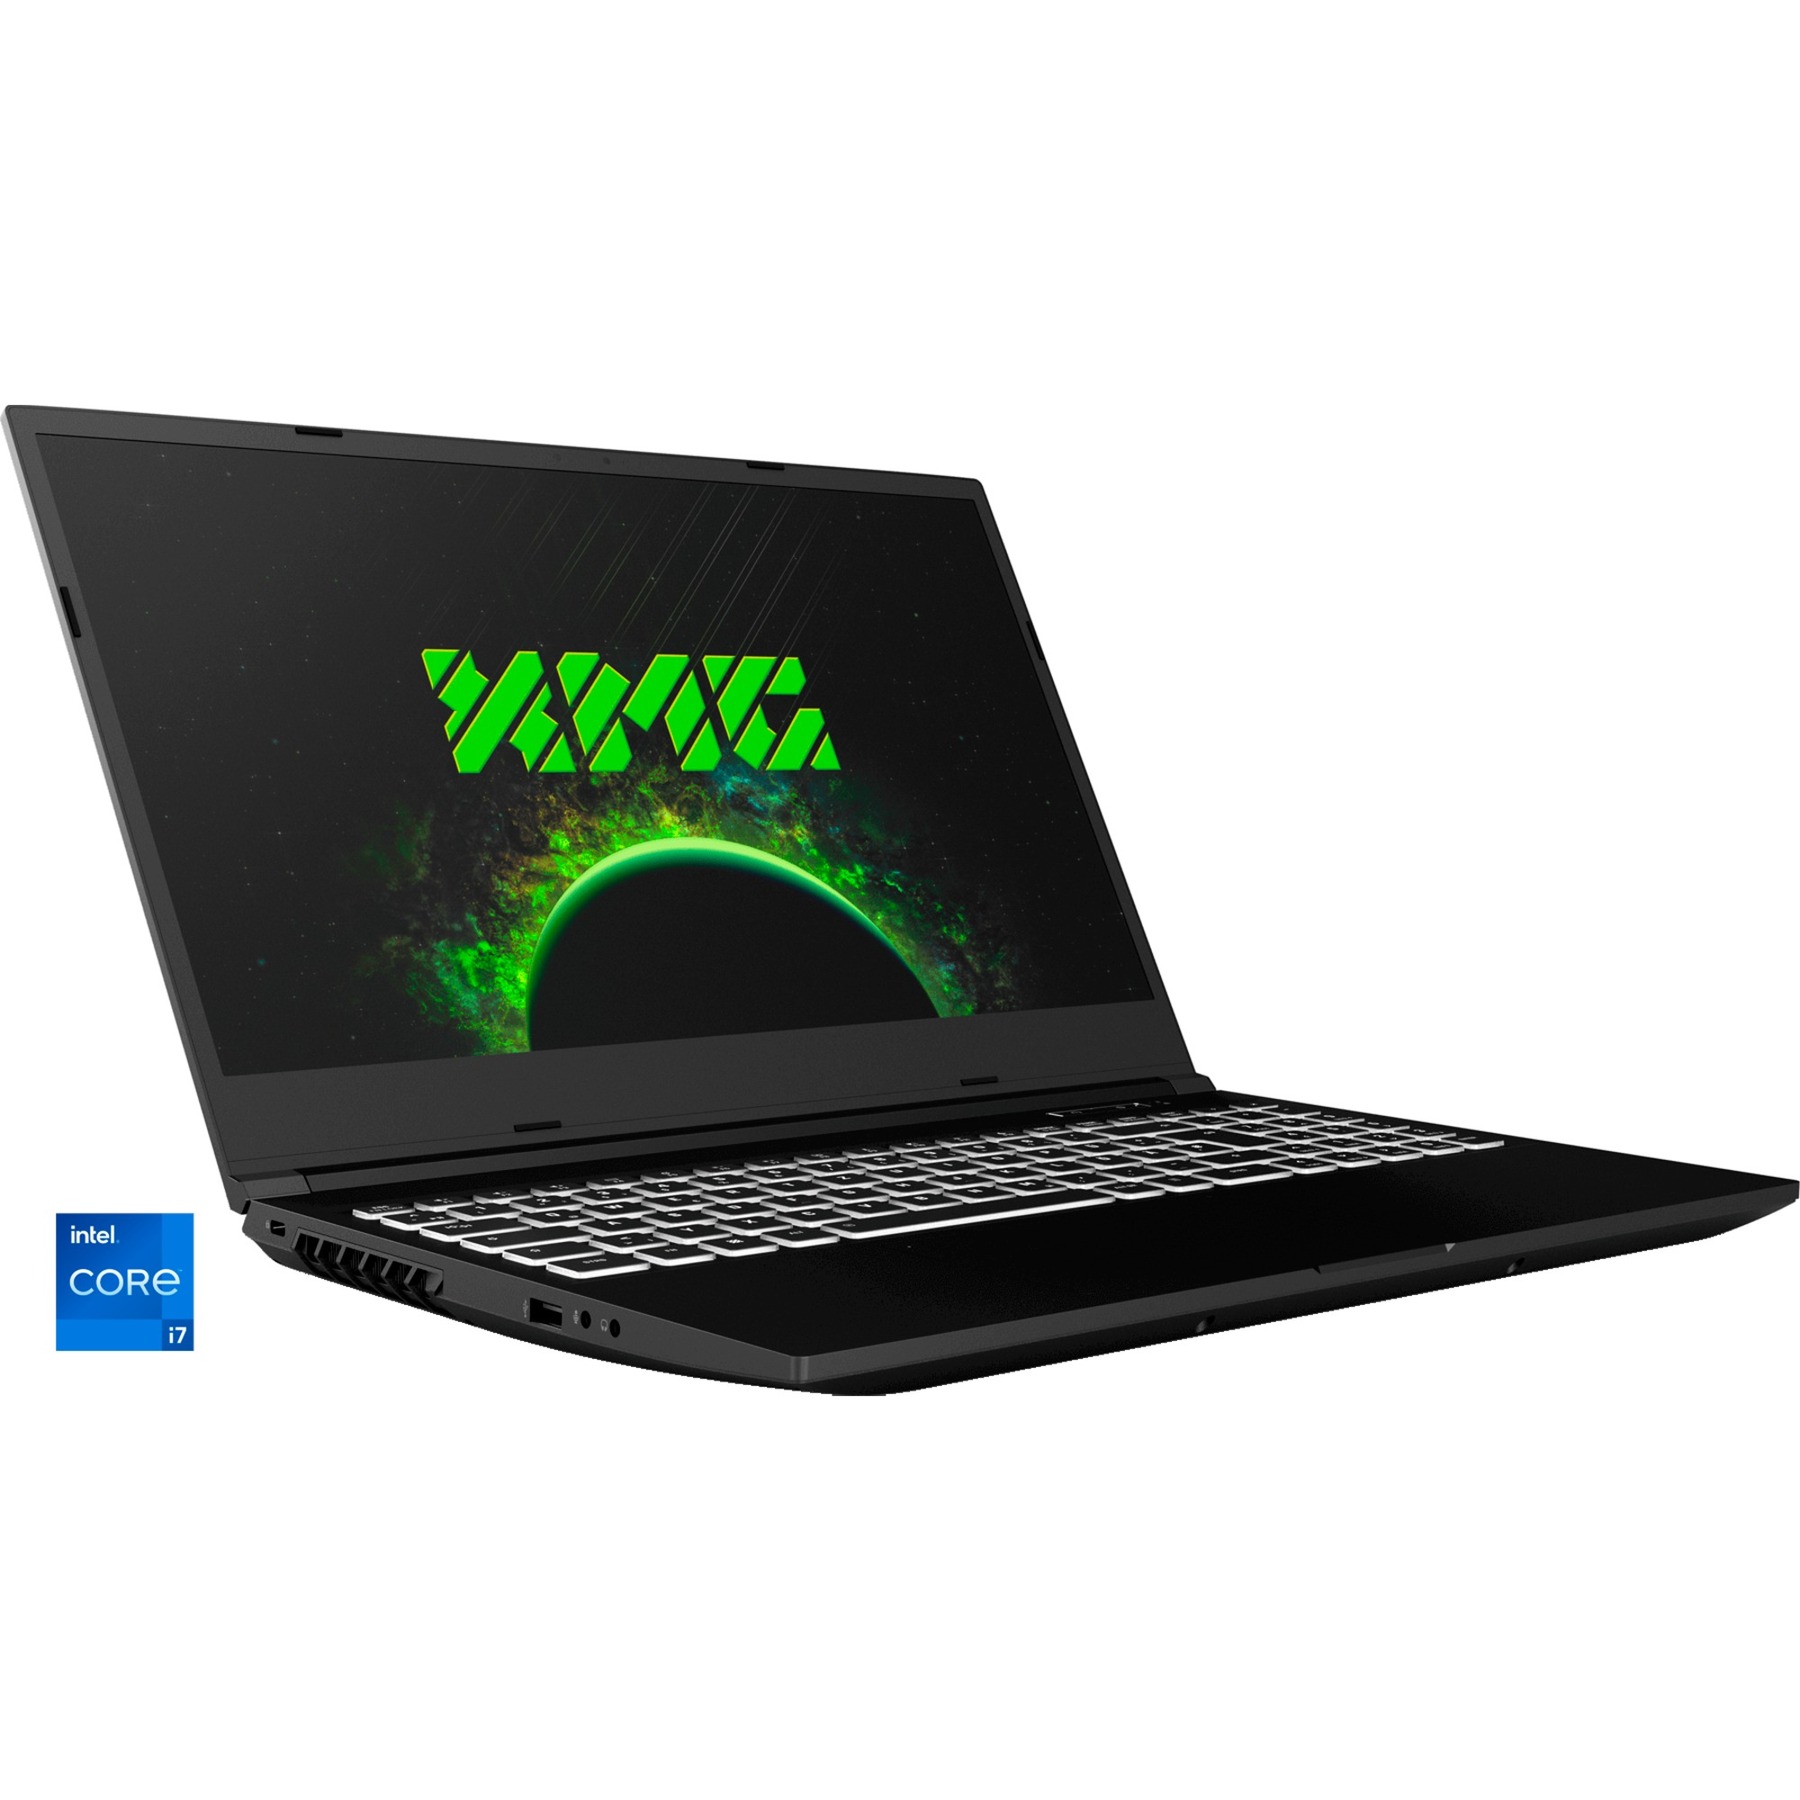 CORE 15 (10505852), Gaming-Notebook